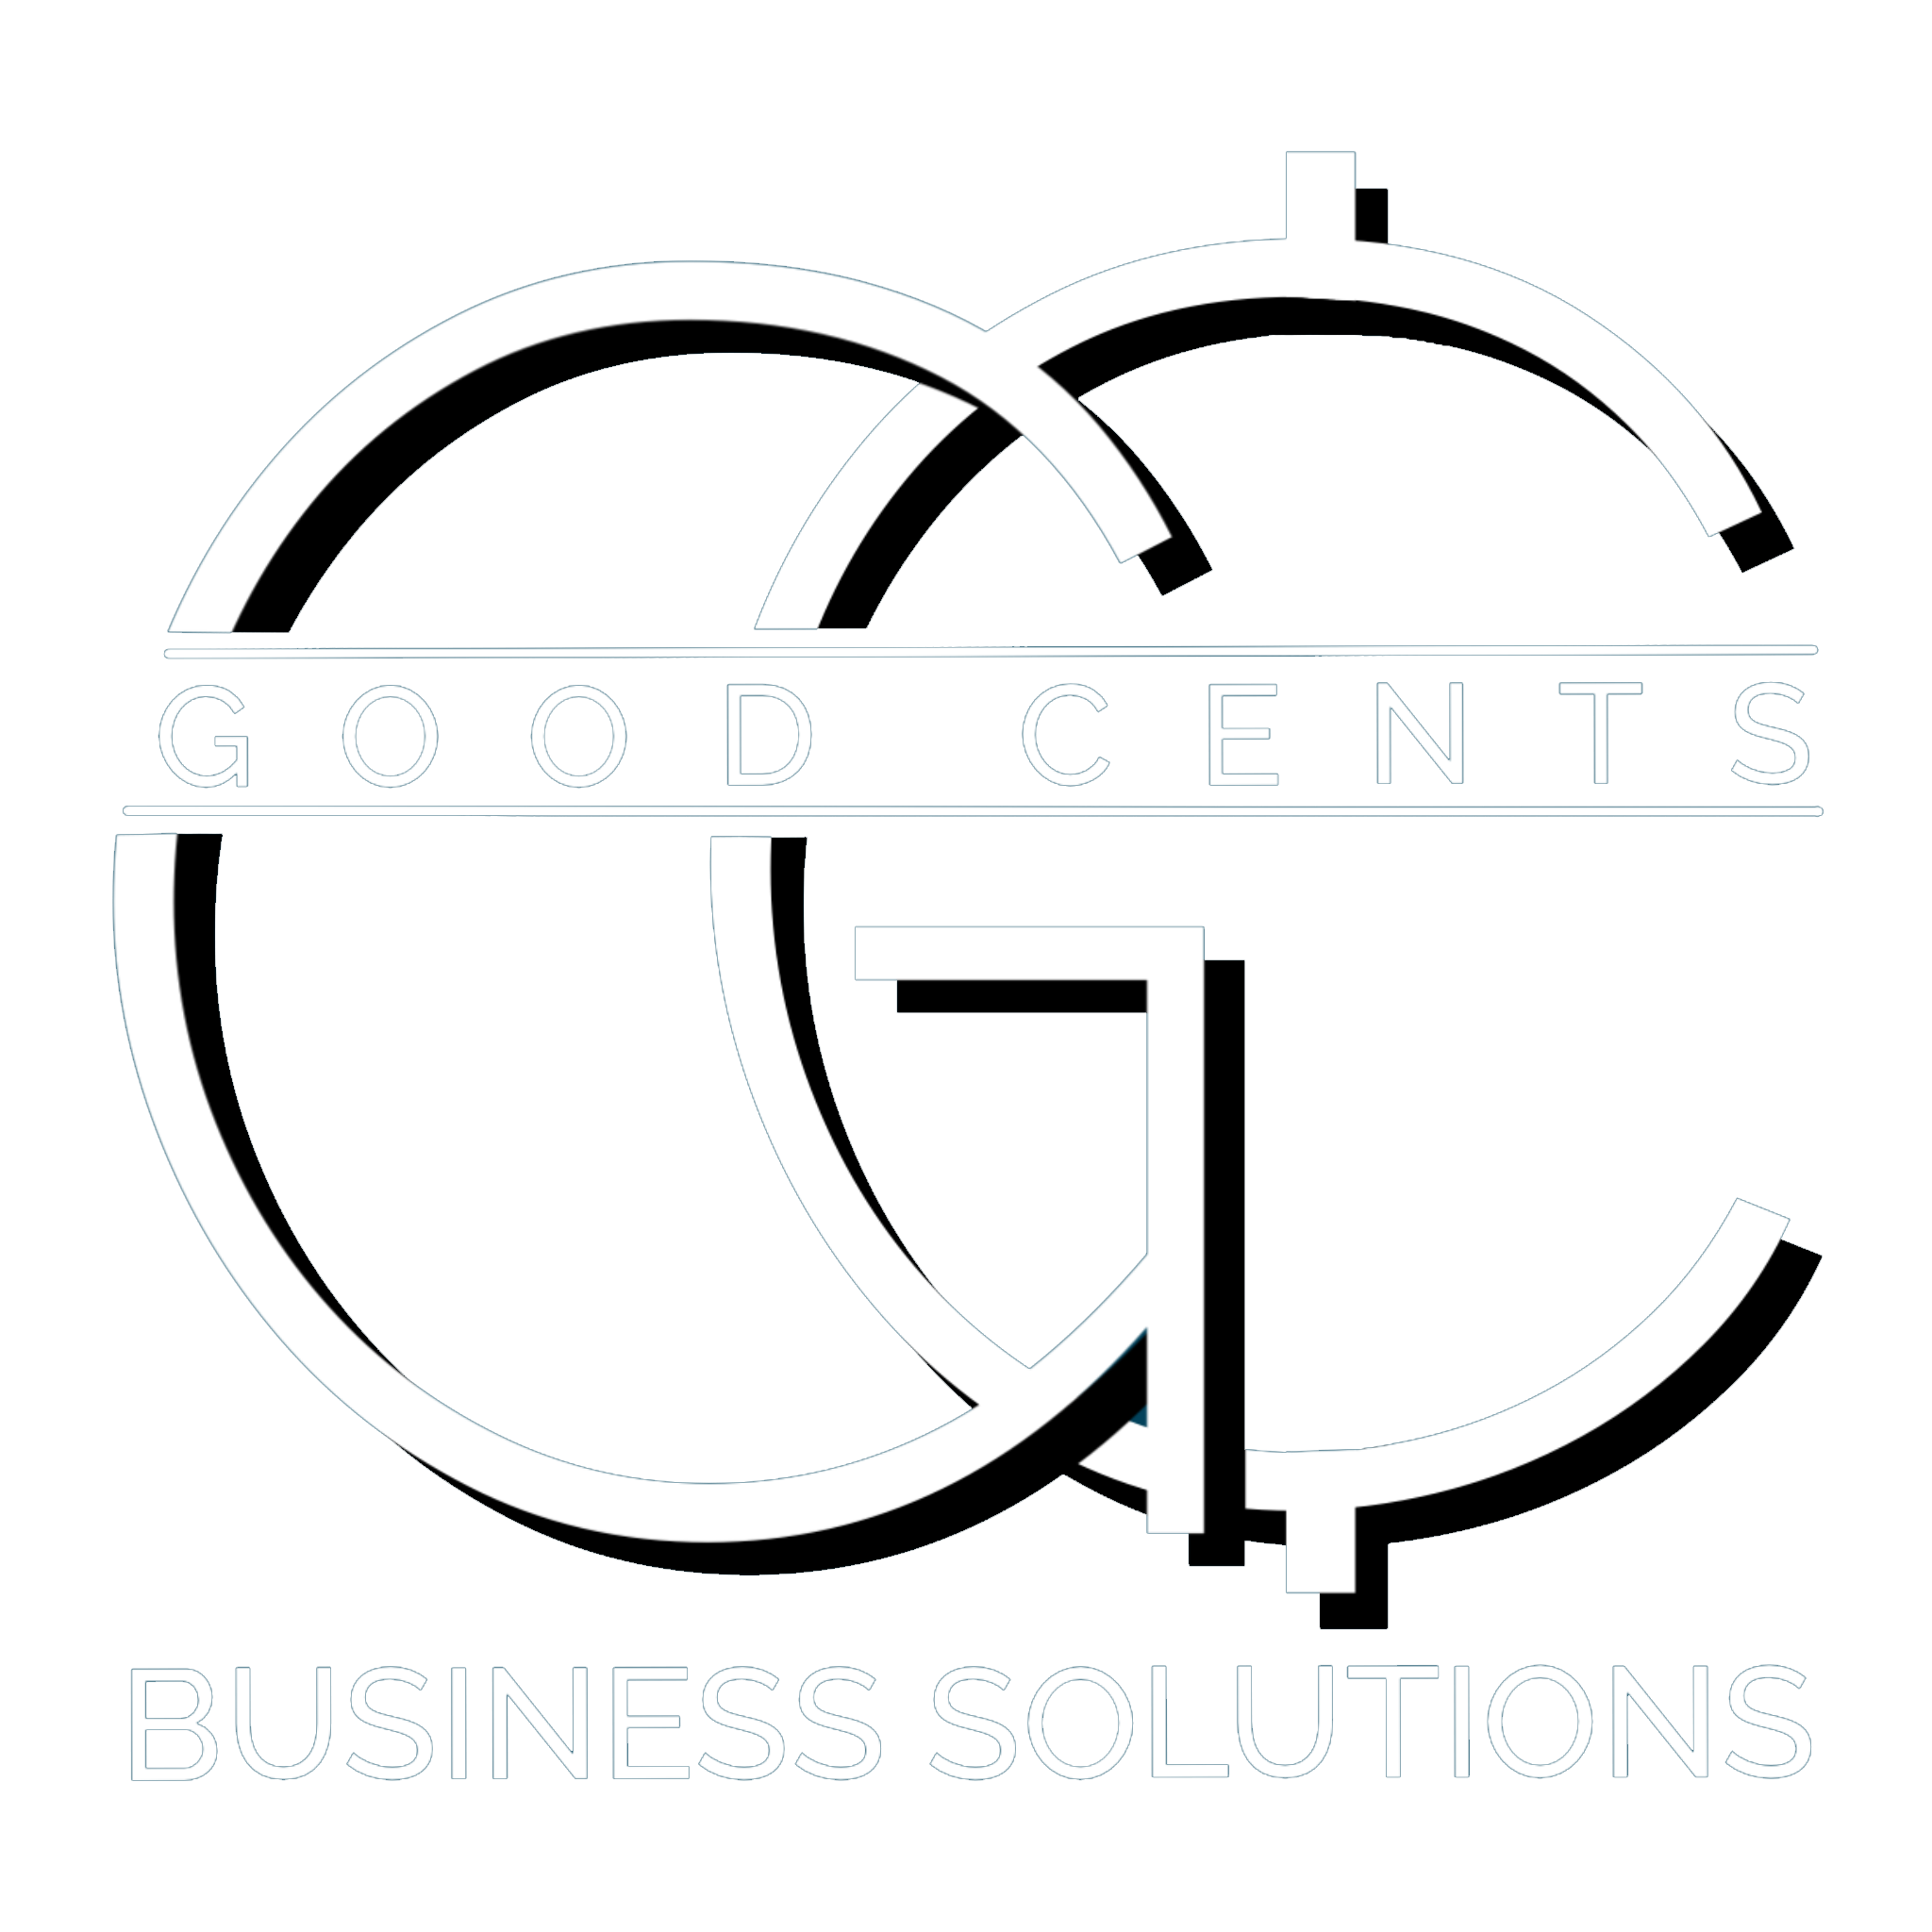 Good Cents Business Solutions Logo